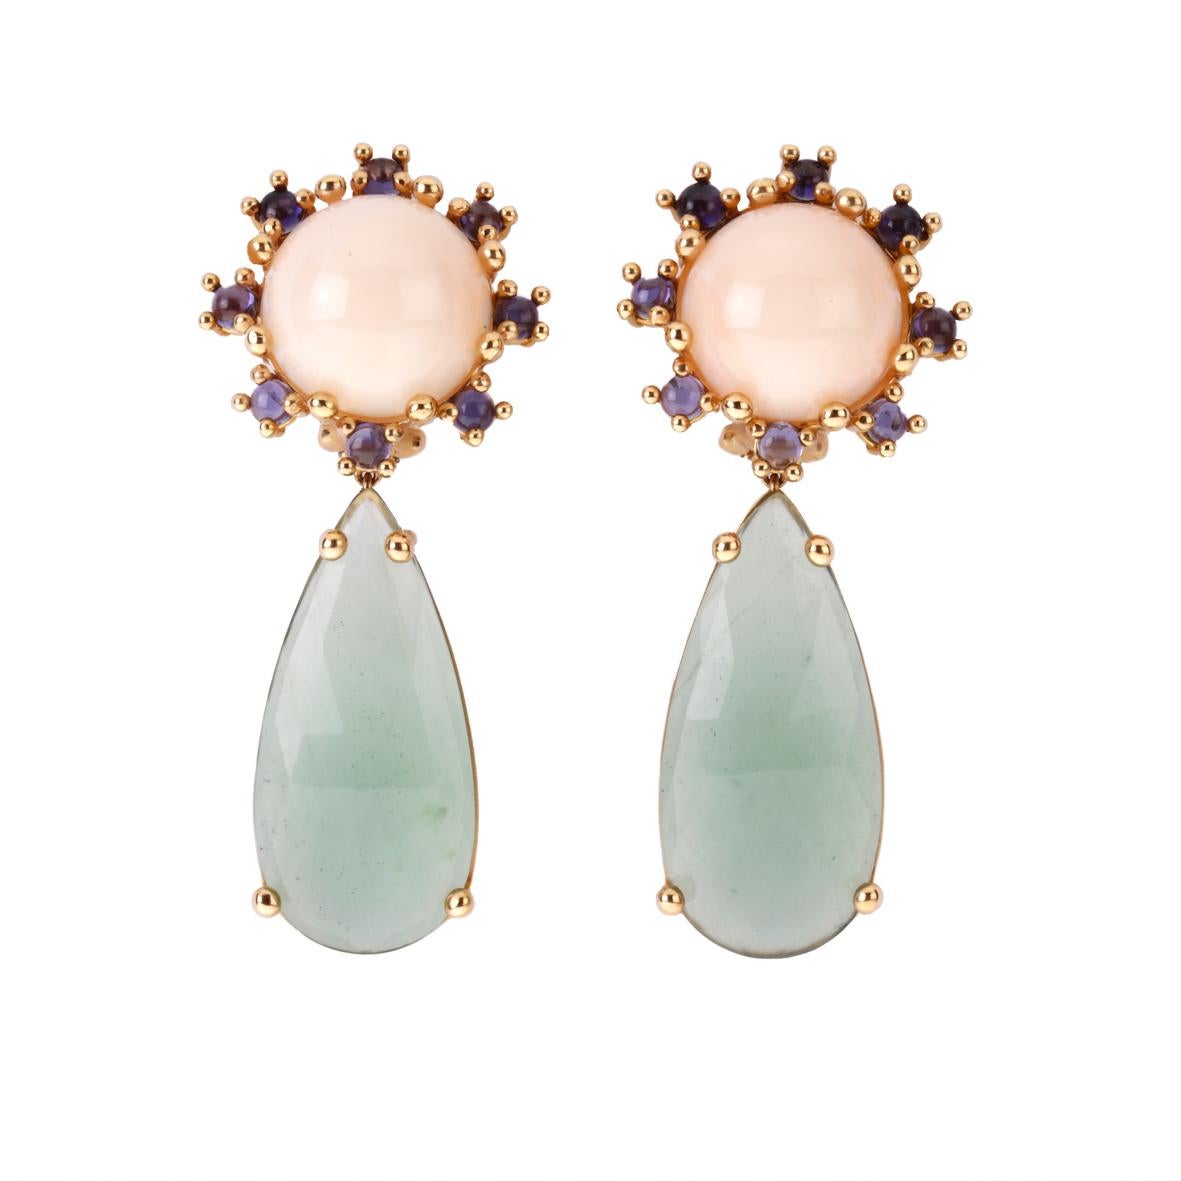 Drops earring vith beautiful serpentine faced drops, 2 peaux d'ange cabochon coral button, cabochon tanzanite,  18kt rose gold.
The total length is 5cm, weight 11,7 gr. each.
All Giulia Colussi jewelry is new and has never been previously owned or